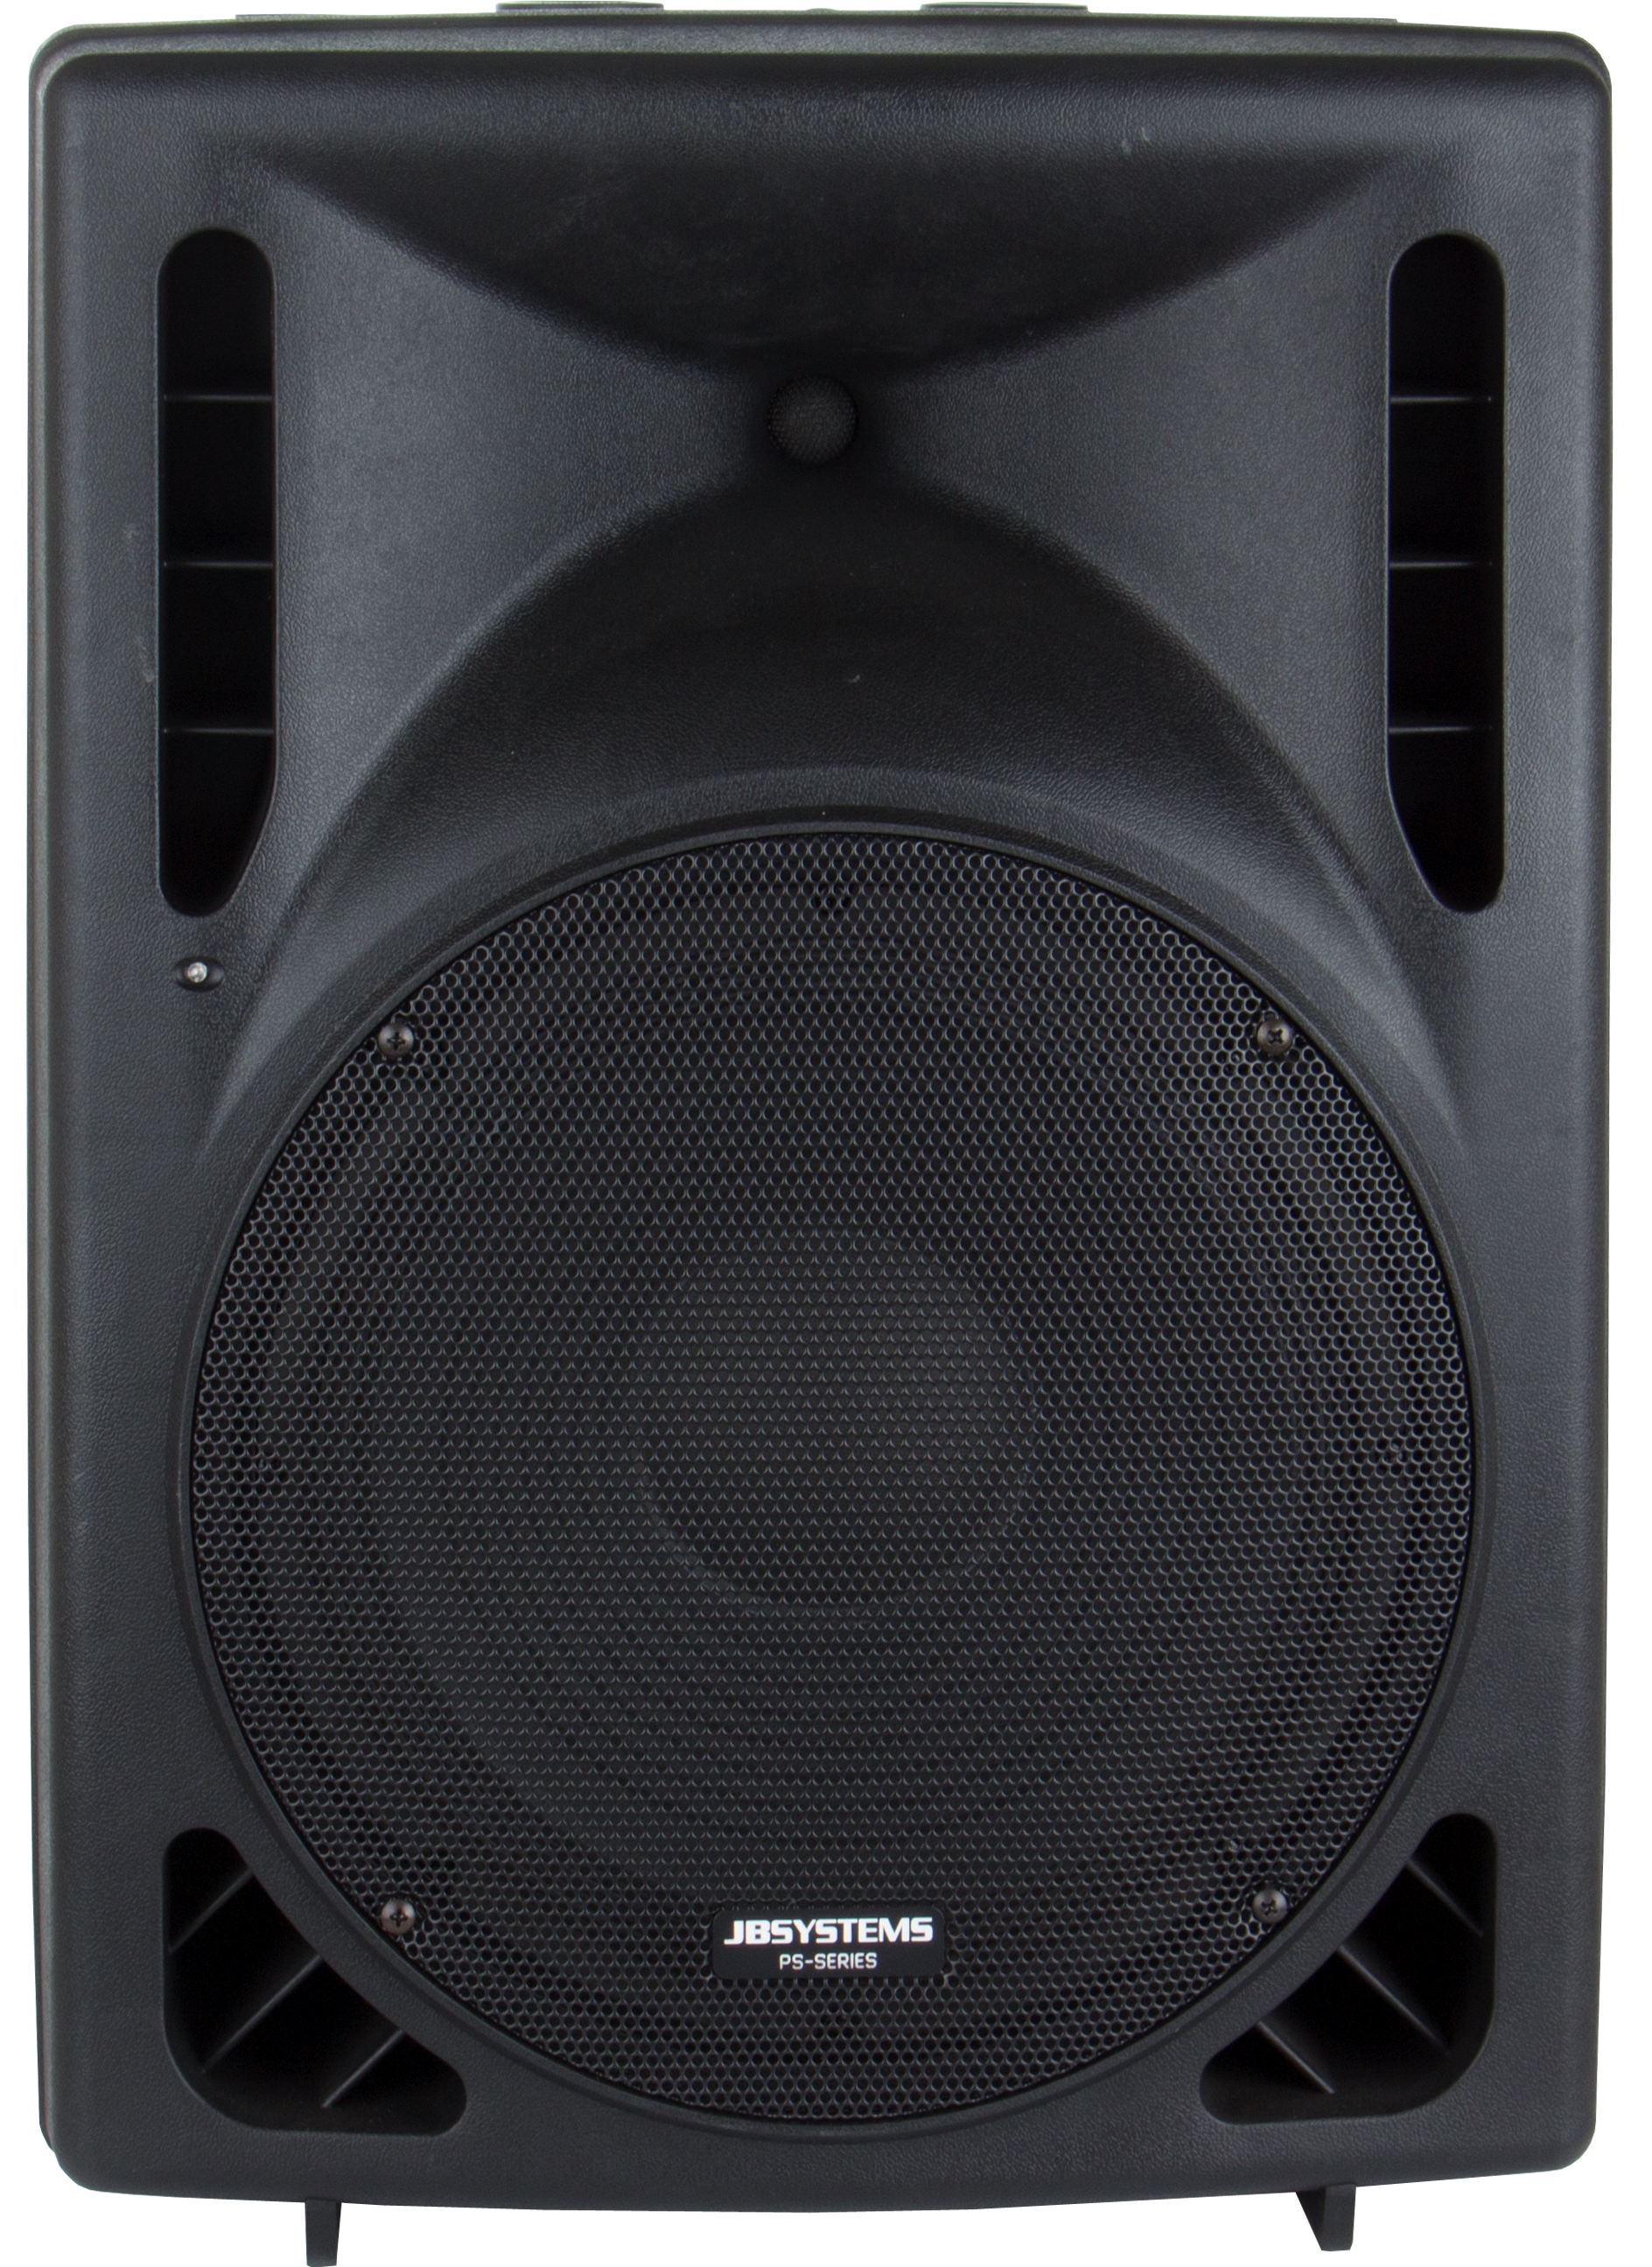 Professional 12" active speaker cabinet for a wide range of different applications.